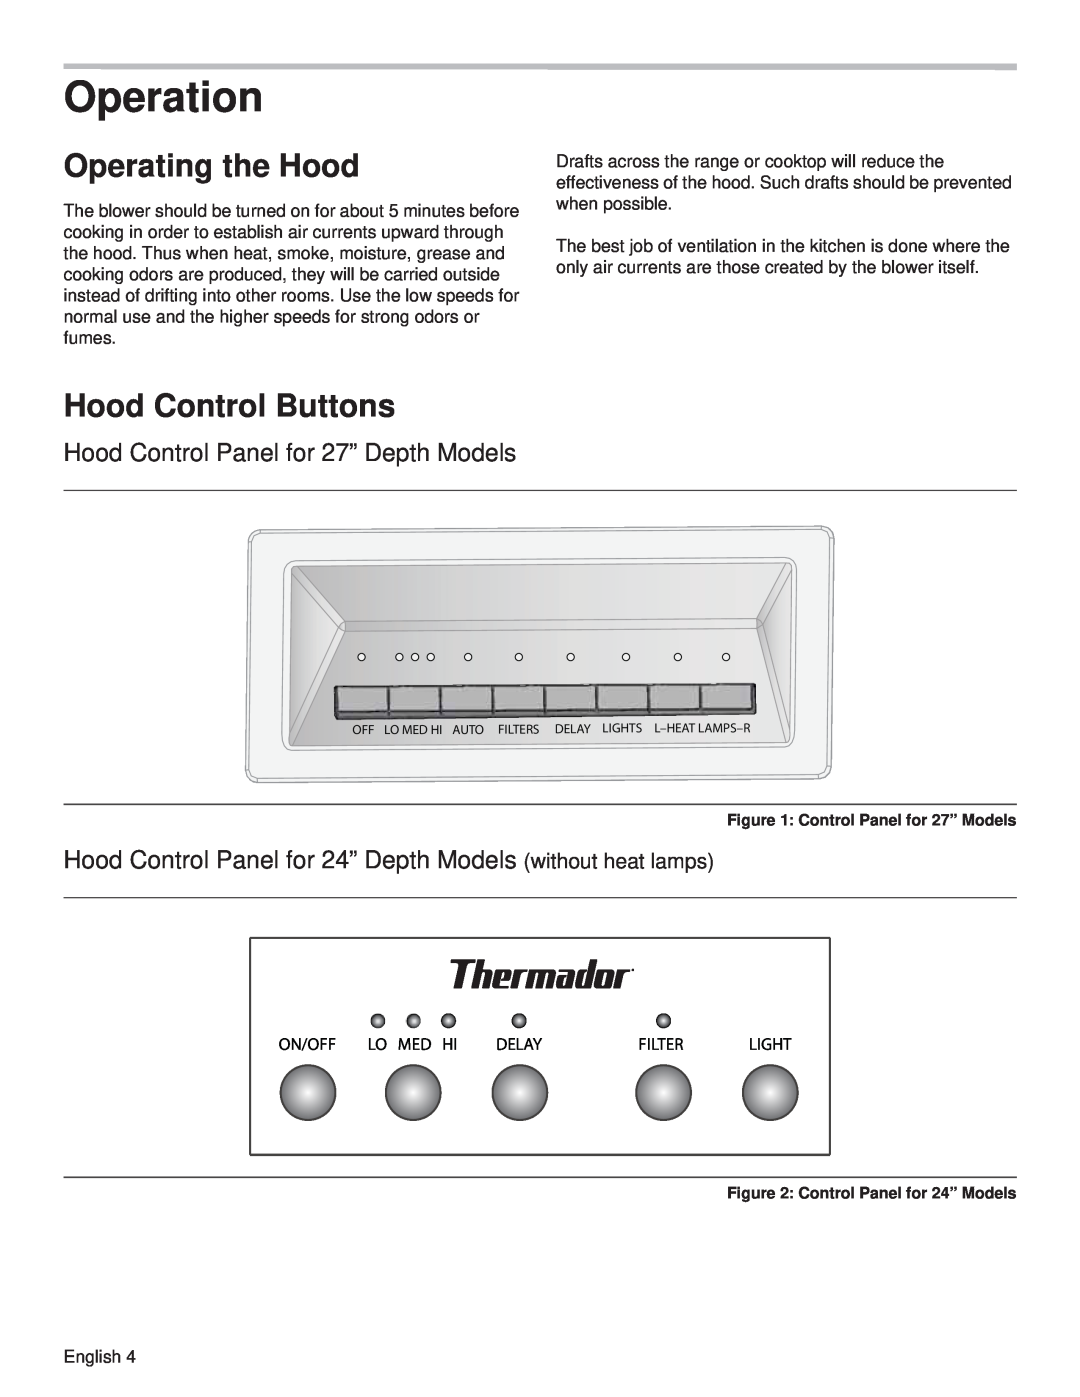 Thermador PH48GS manual Operation, Operating the Hood, Hood Control Buttons, Hood Control Panel for 27” Depth Models, Delay 